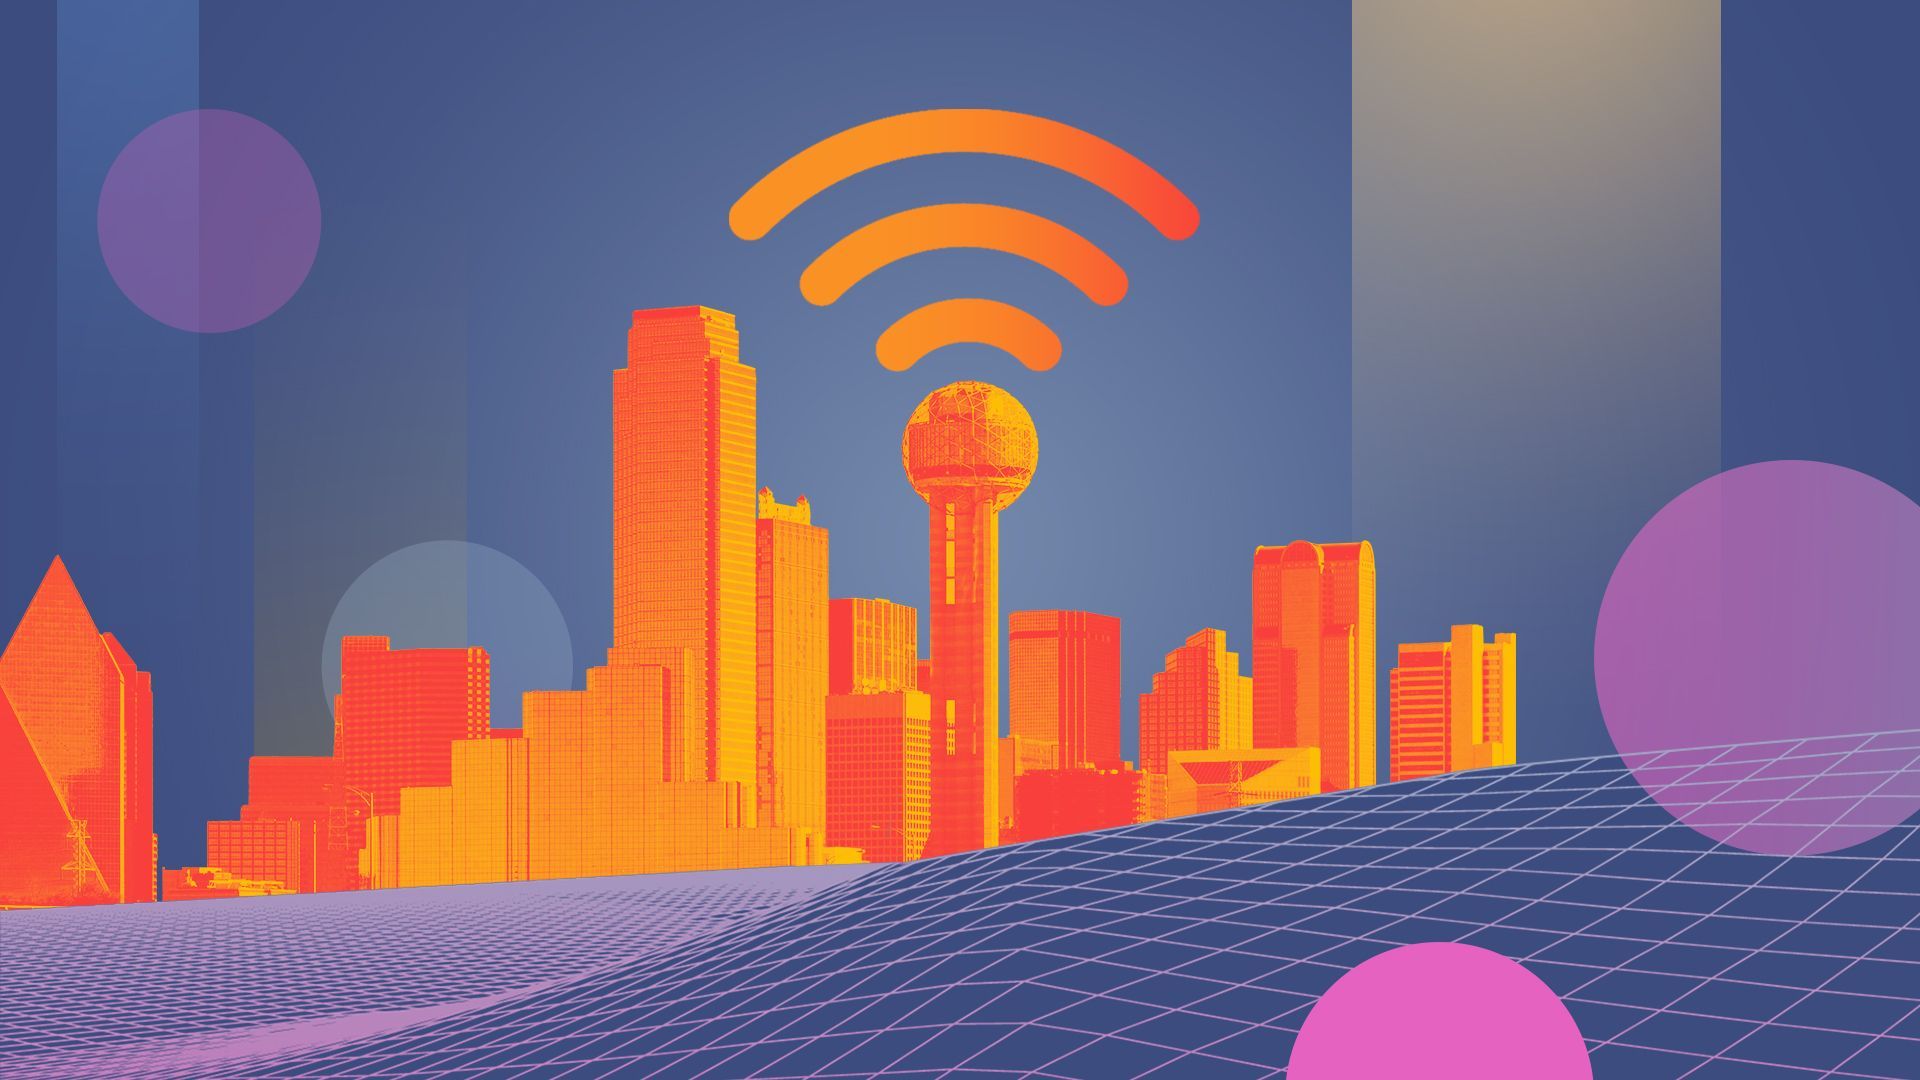 Illustration of a wireframe futuristic landscape with the skyline of Dallas and a wifi symbol in the sky.